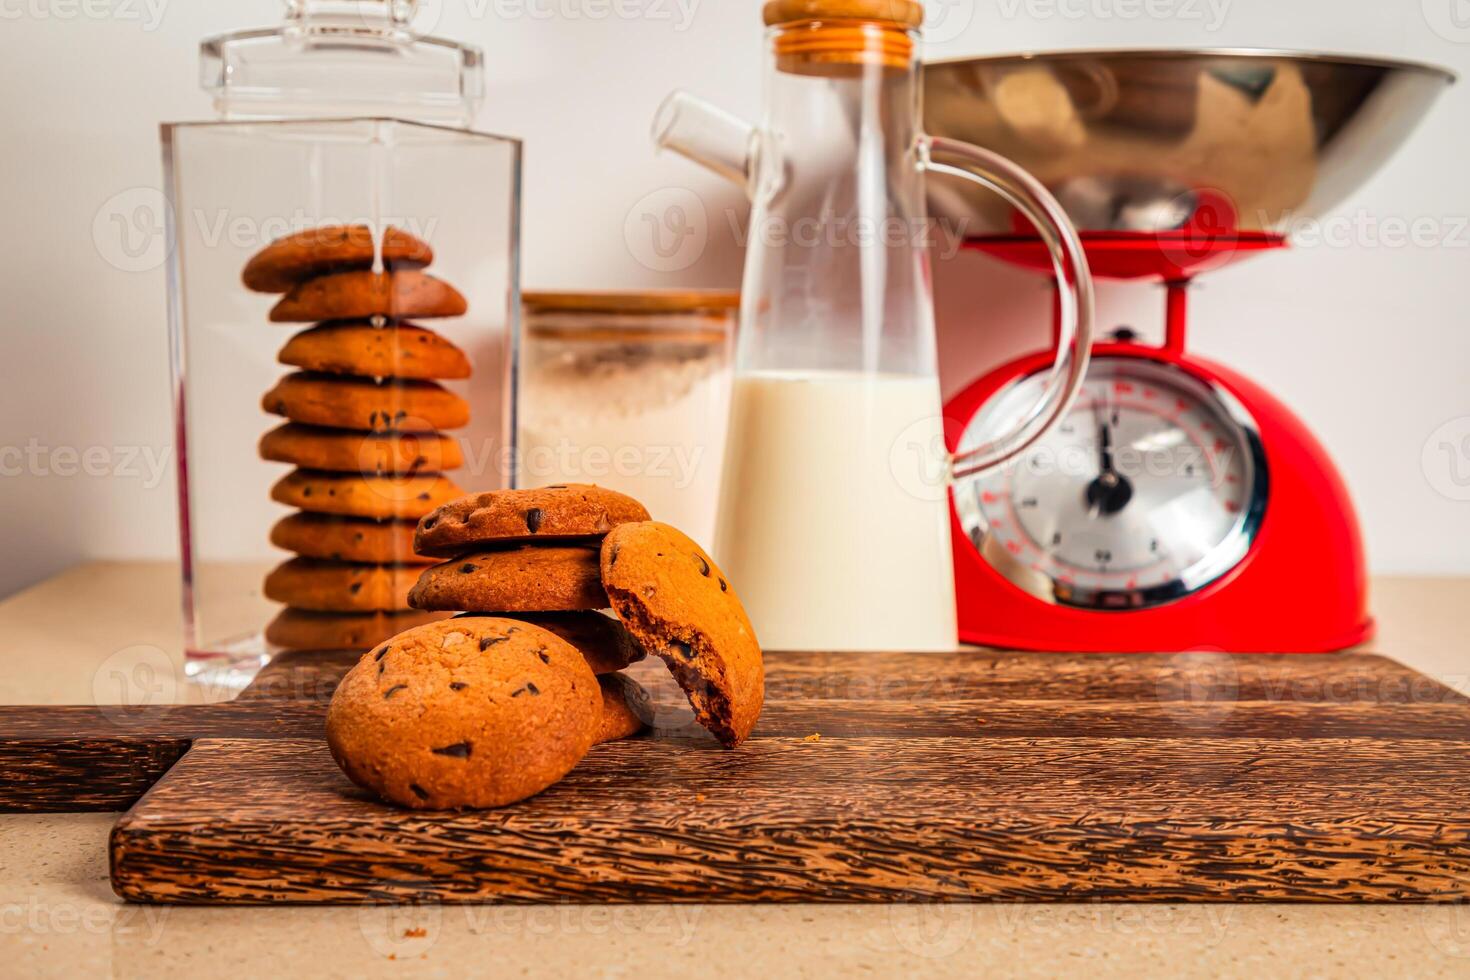 Tasty Chocolate cookie with jug of milk served on wooden board side view of healthy breakfast on table photo